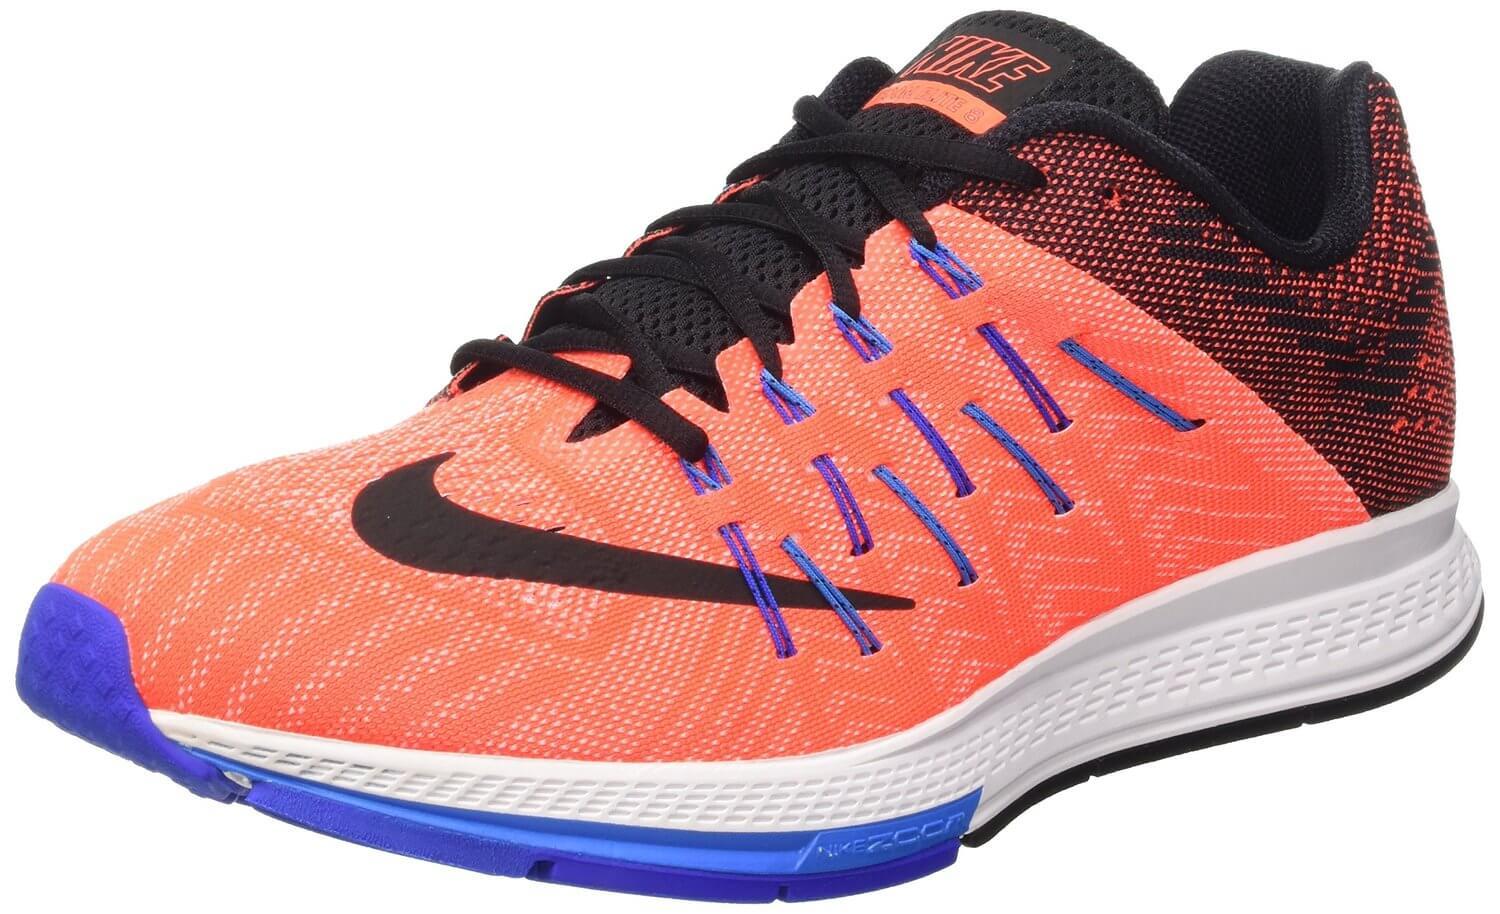 derivación Parte fuego Nike Air Zoom Elite 8 Reviewed, Tested & Compared in 2022 | RunnerClick